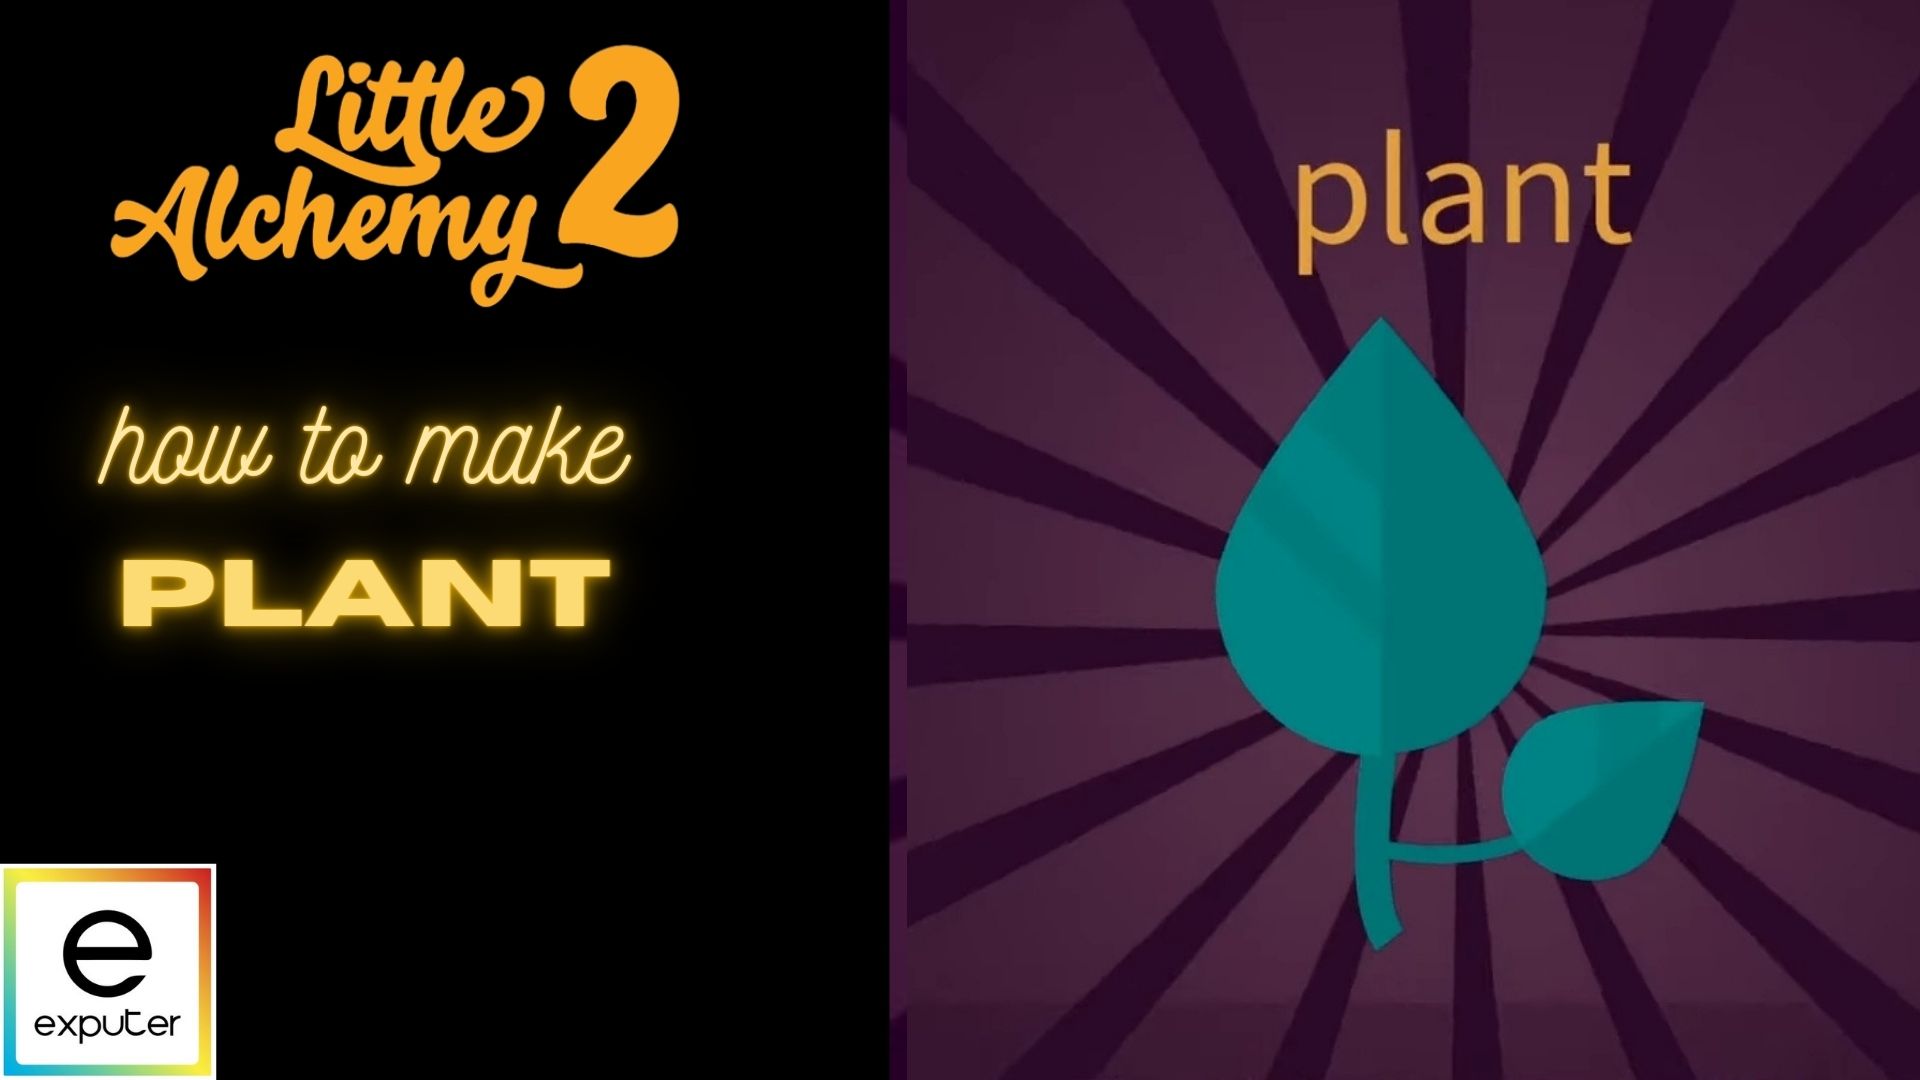 How to make plant - Little Alchemy 2 Official Hints and Cheats